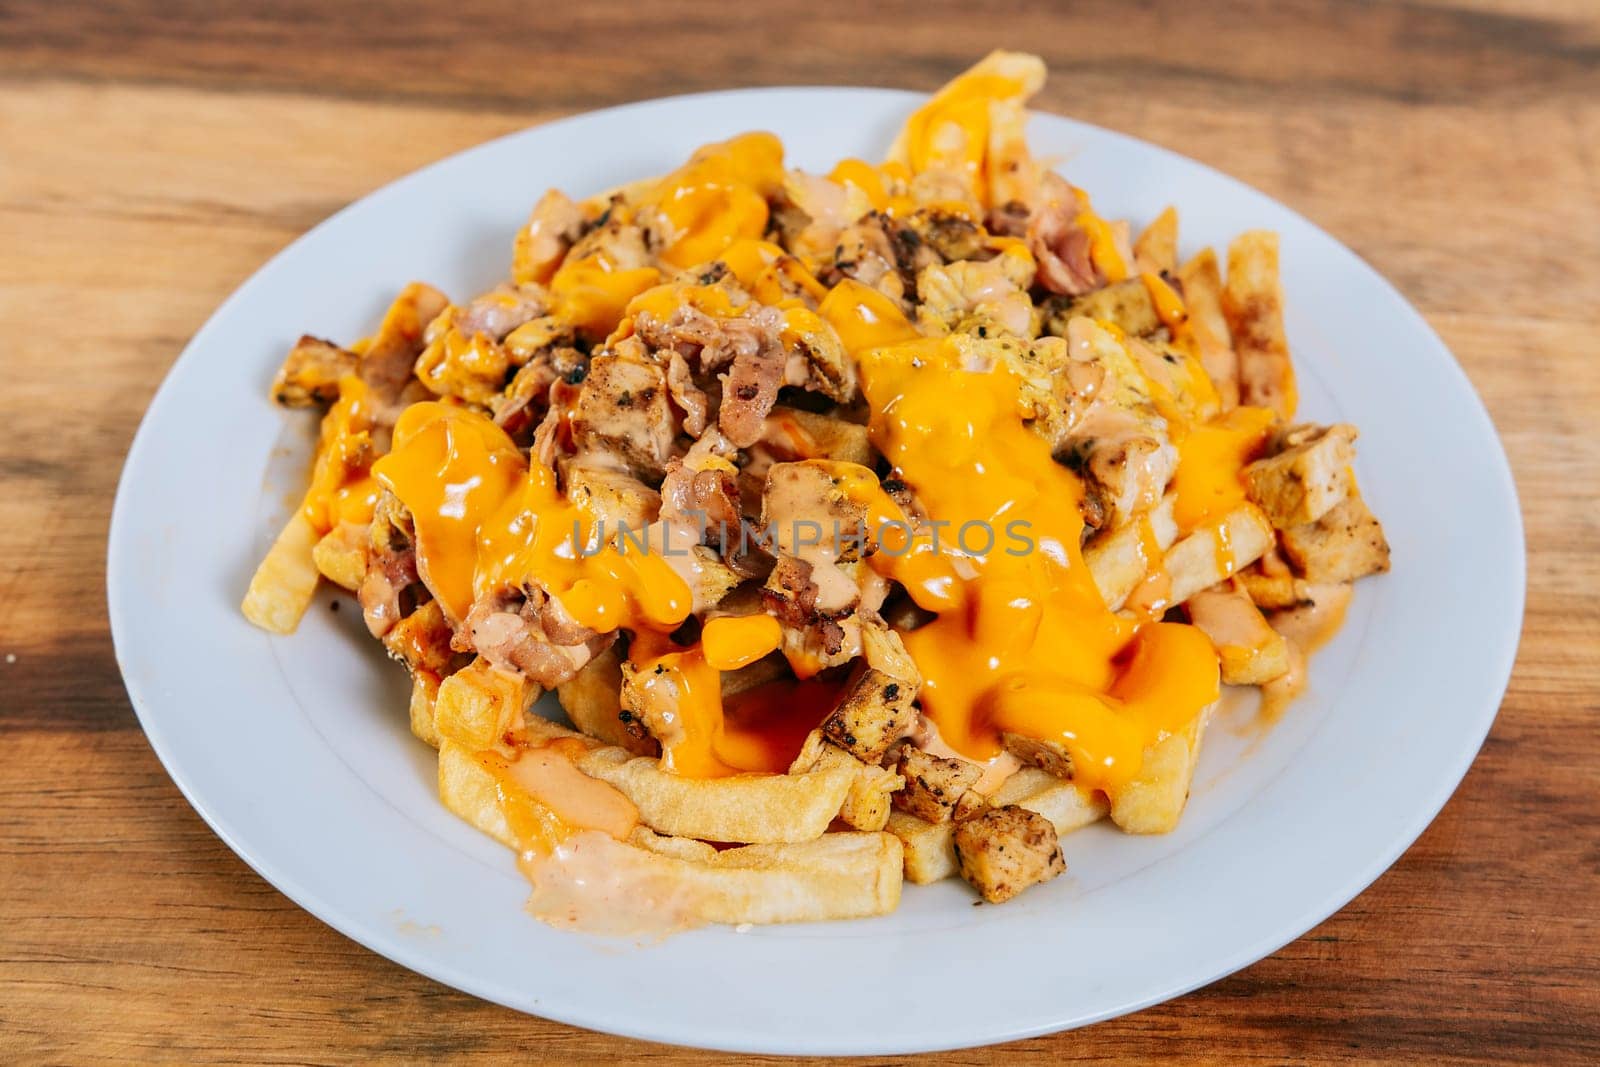 Plate of chicken nachos with potatoes and melted cheese on table. Traditional chicken nachos with melted cheese by isaiphoto